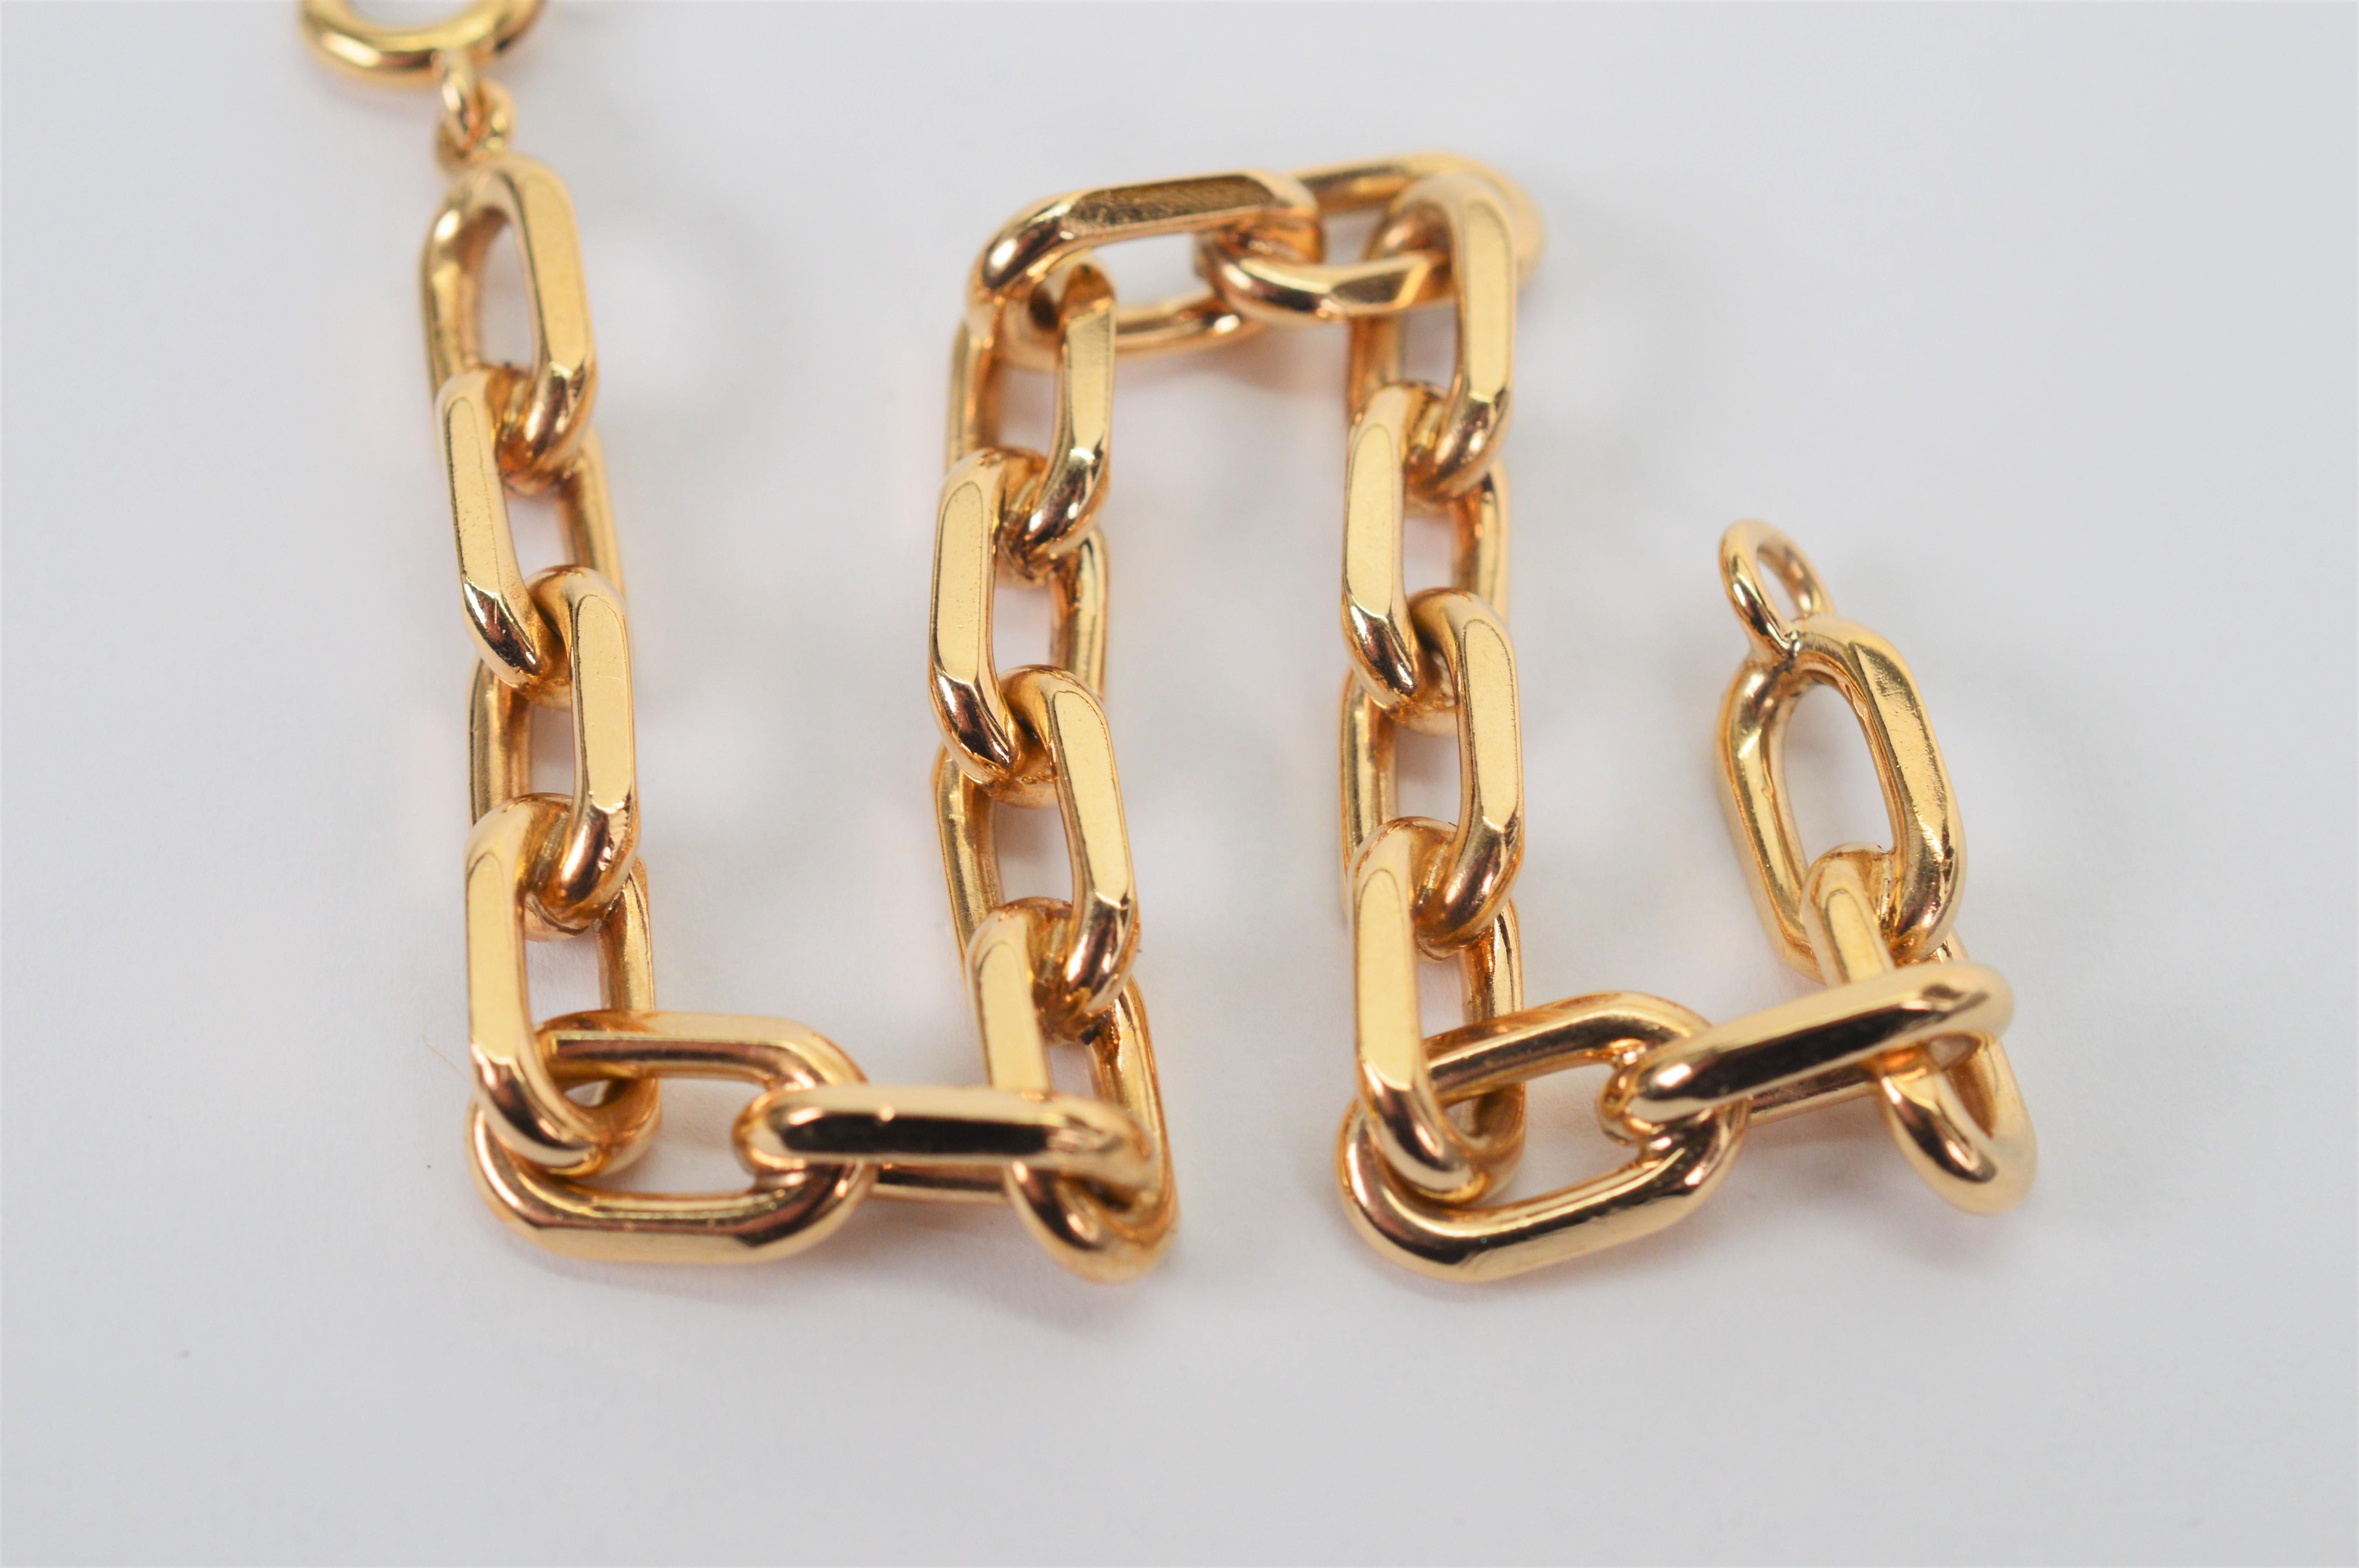 4 pennyweight gold chain